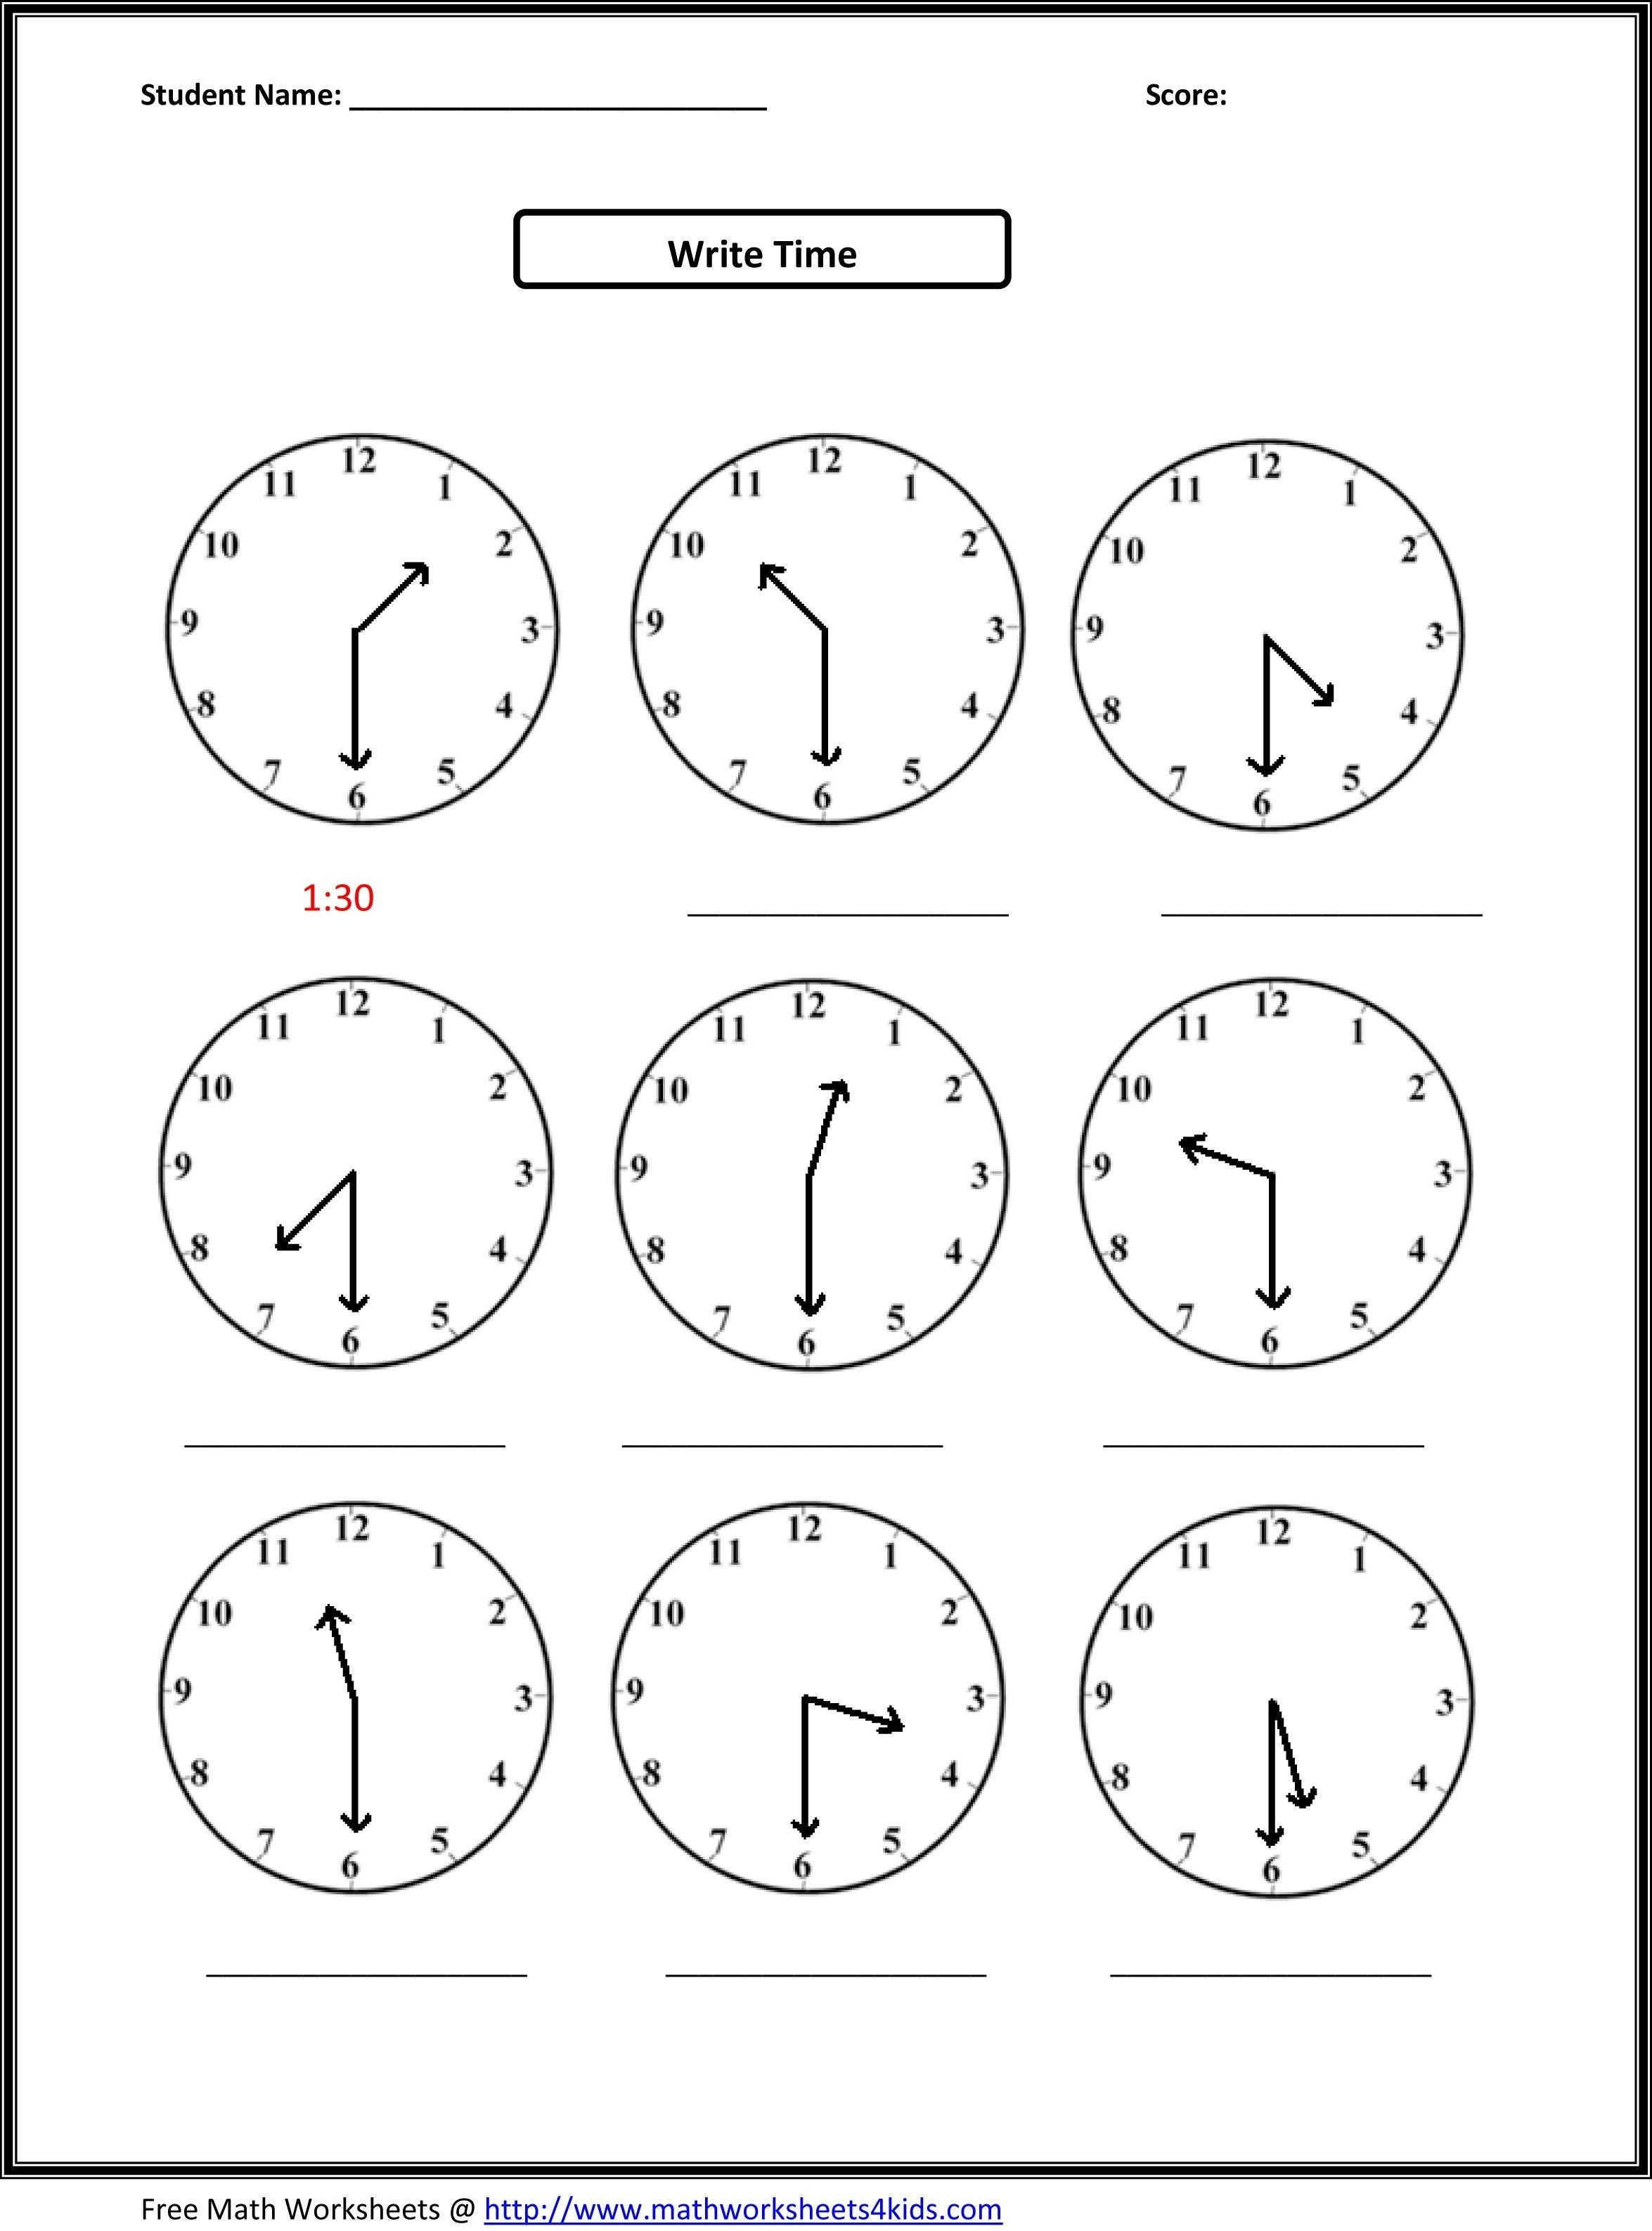 Worksheet Of Clock For Class 3